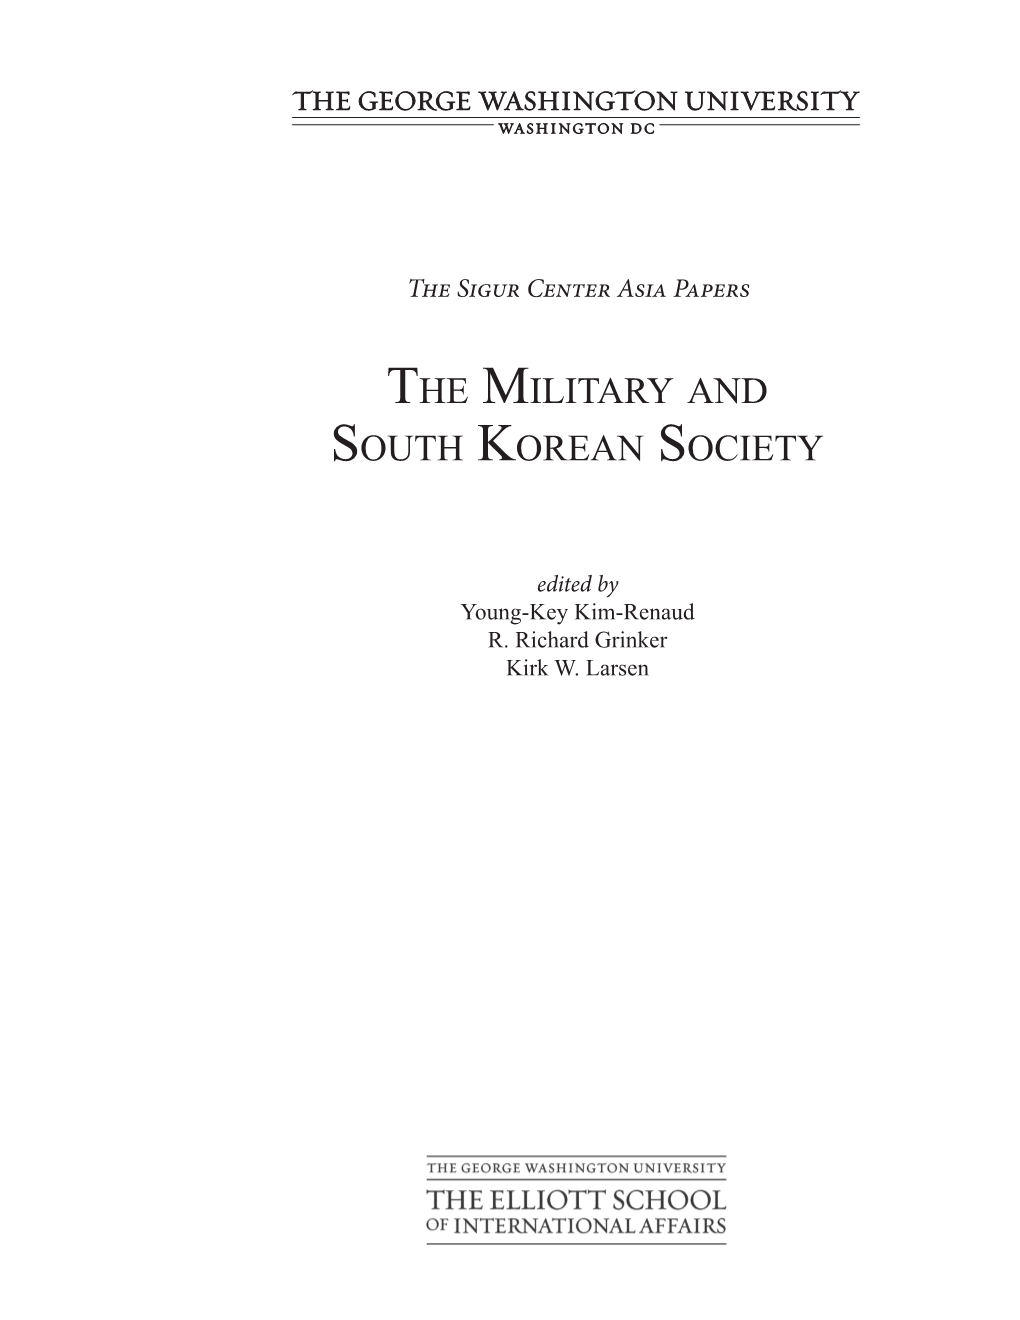 The Military and South Korean Society